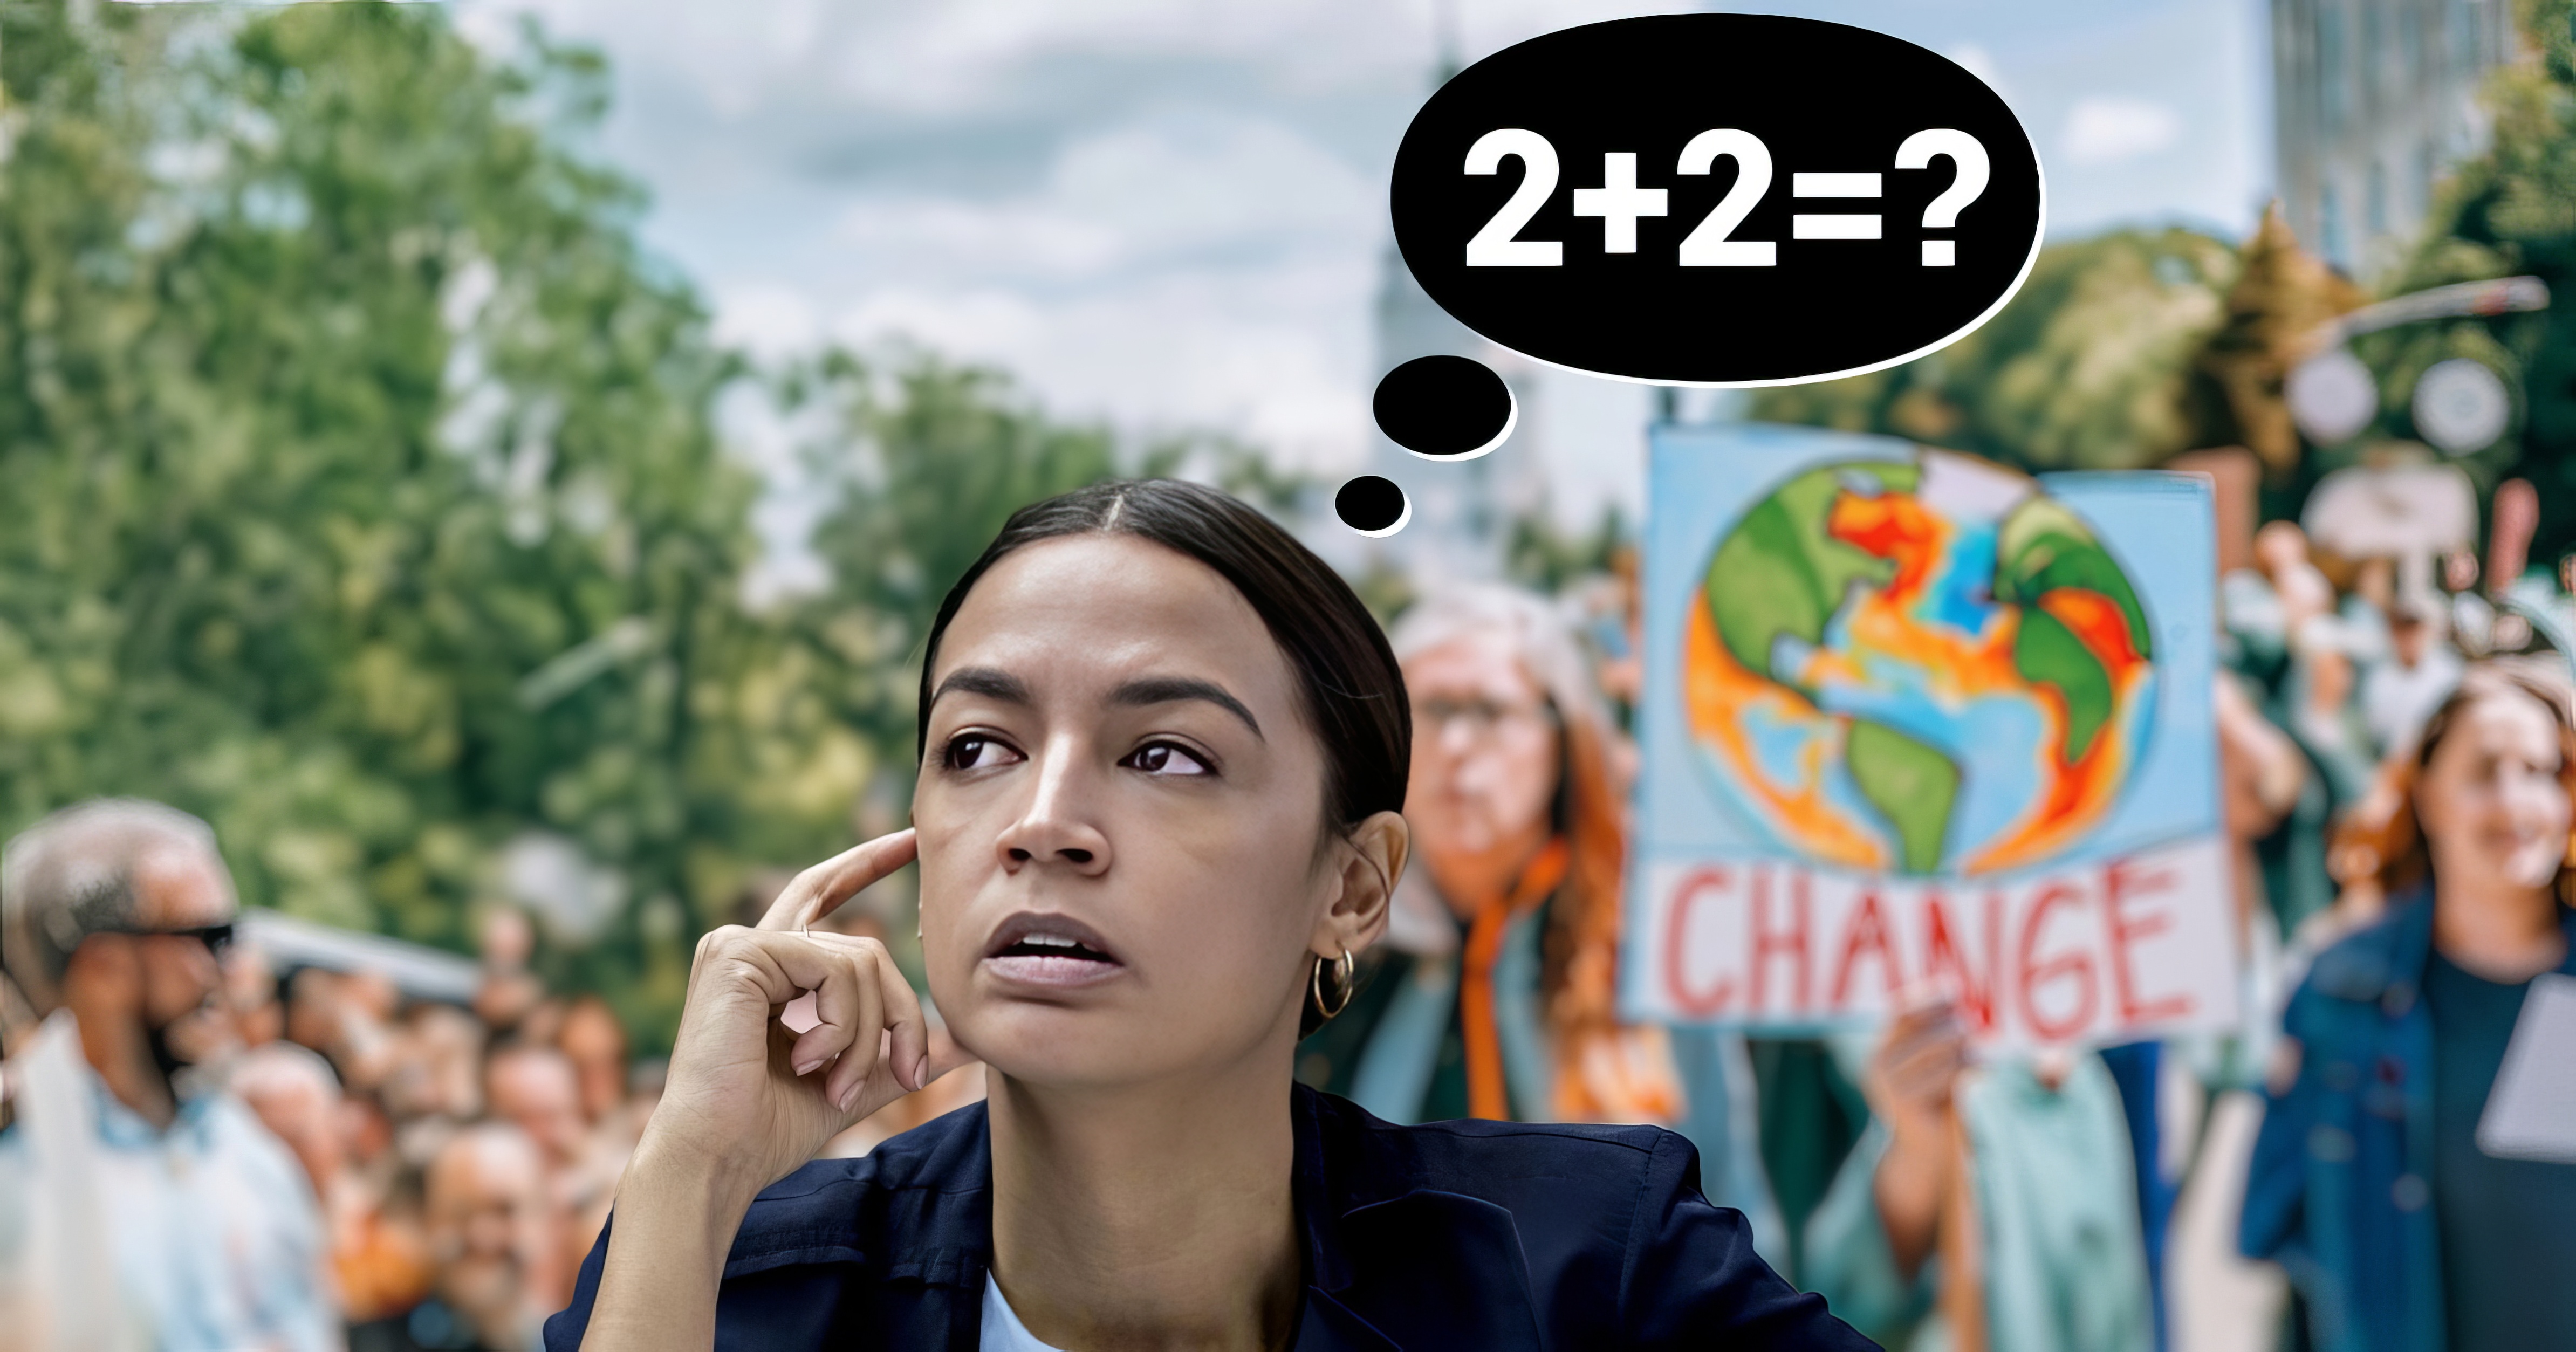 Alexandria Ocasio-Cortez pondering the answer to 2+2 in a thought bubble at a climate rally in background.